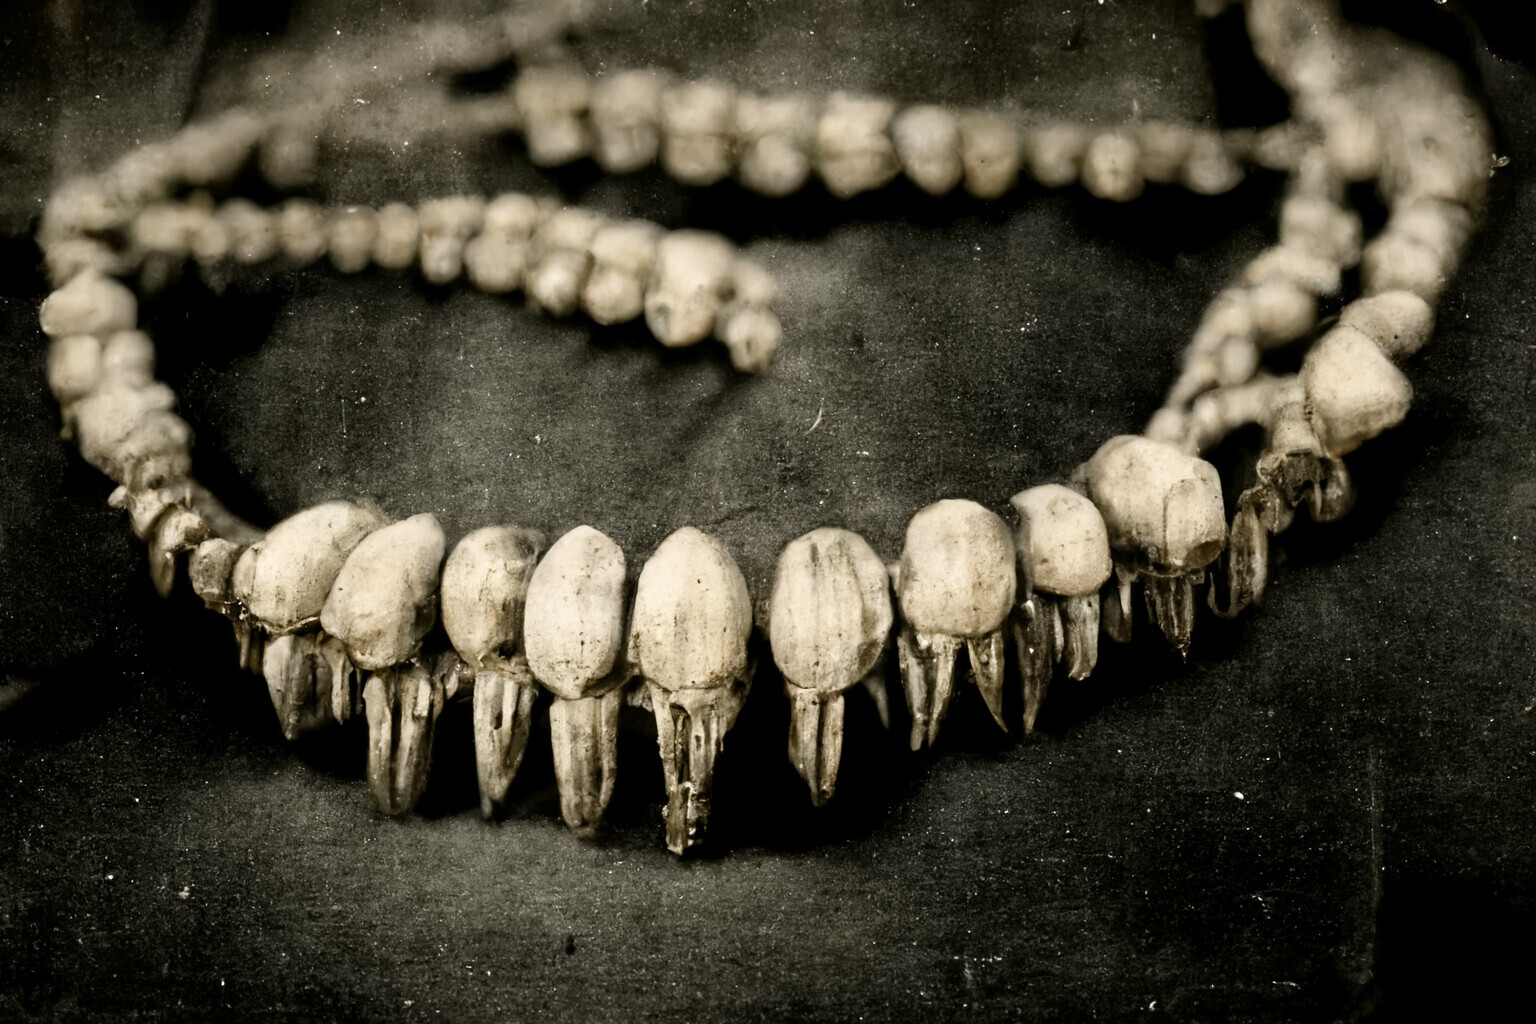 Trencher Trophy Necklace
c.1910
'Belonged to Sofia Căpreanu'